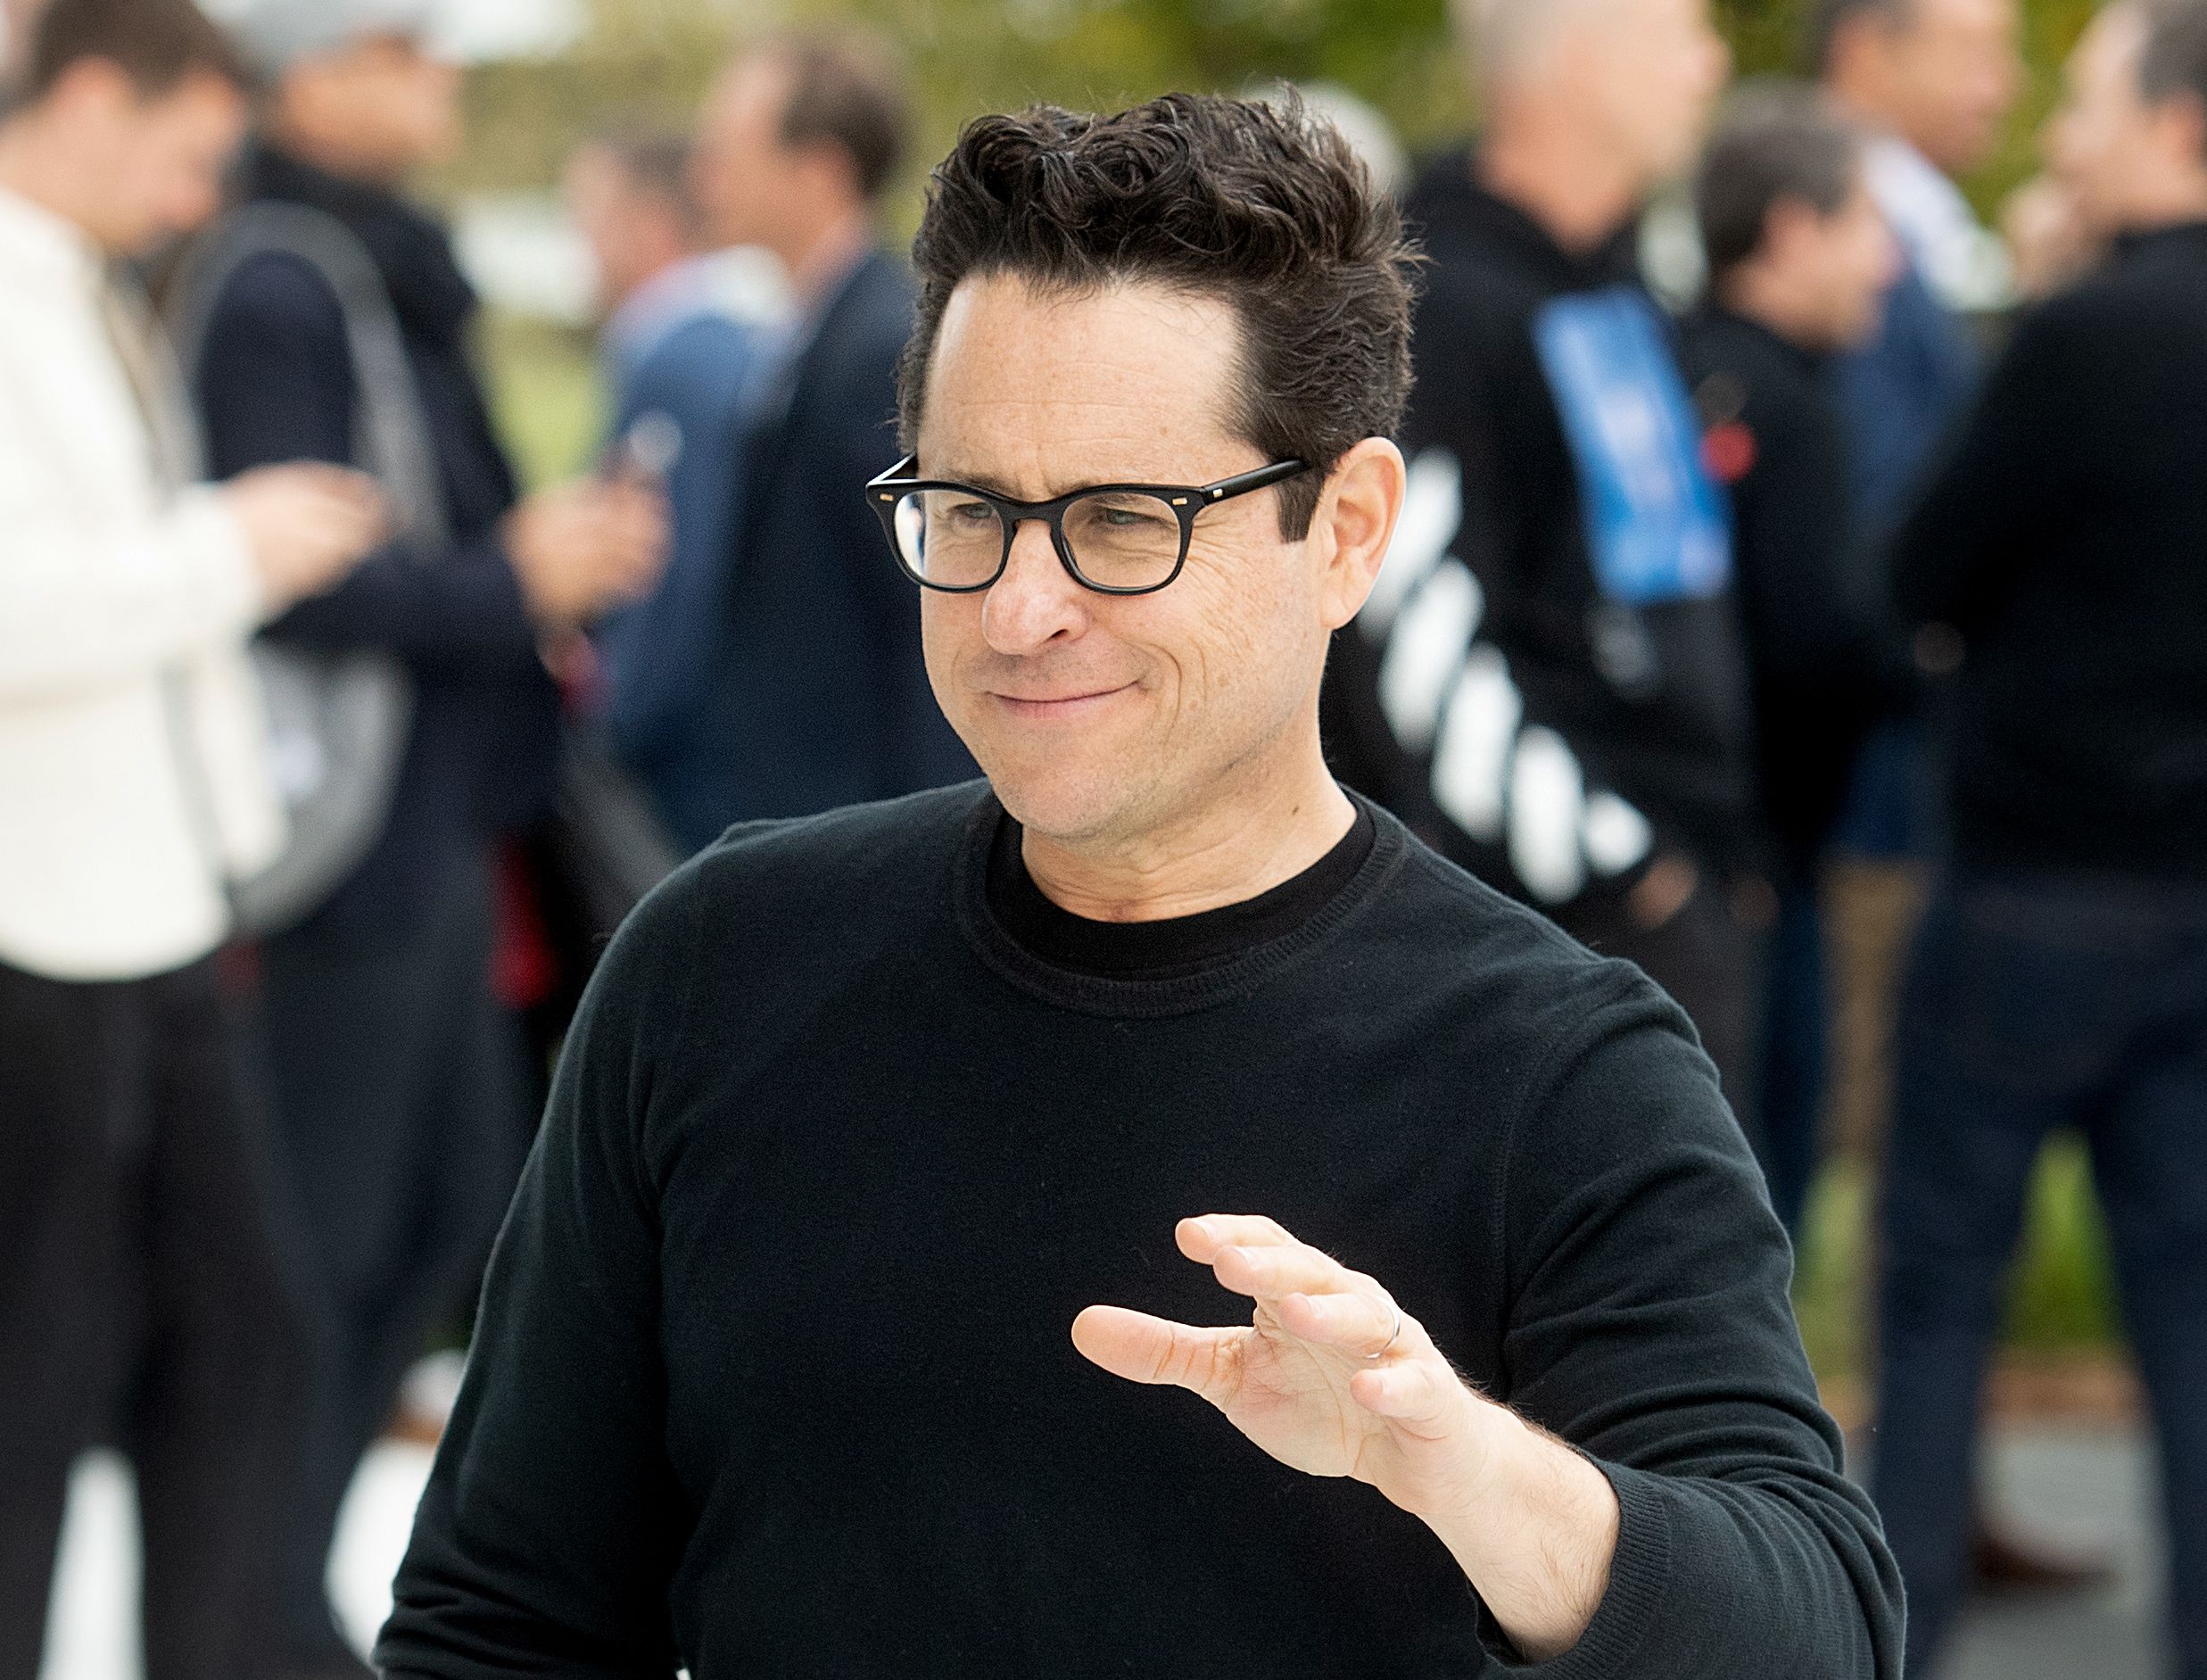 Filmmaker J.J. Abrams leaves an event launching Apple tv+ at Apple headquarters on March 25, 2019, in Cupertino, California. (Photo by NOAH BERGER / AFP)        (Photo credit should read NOAH BERGER/AFP/Getty Images)